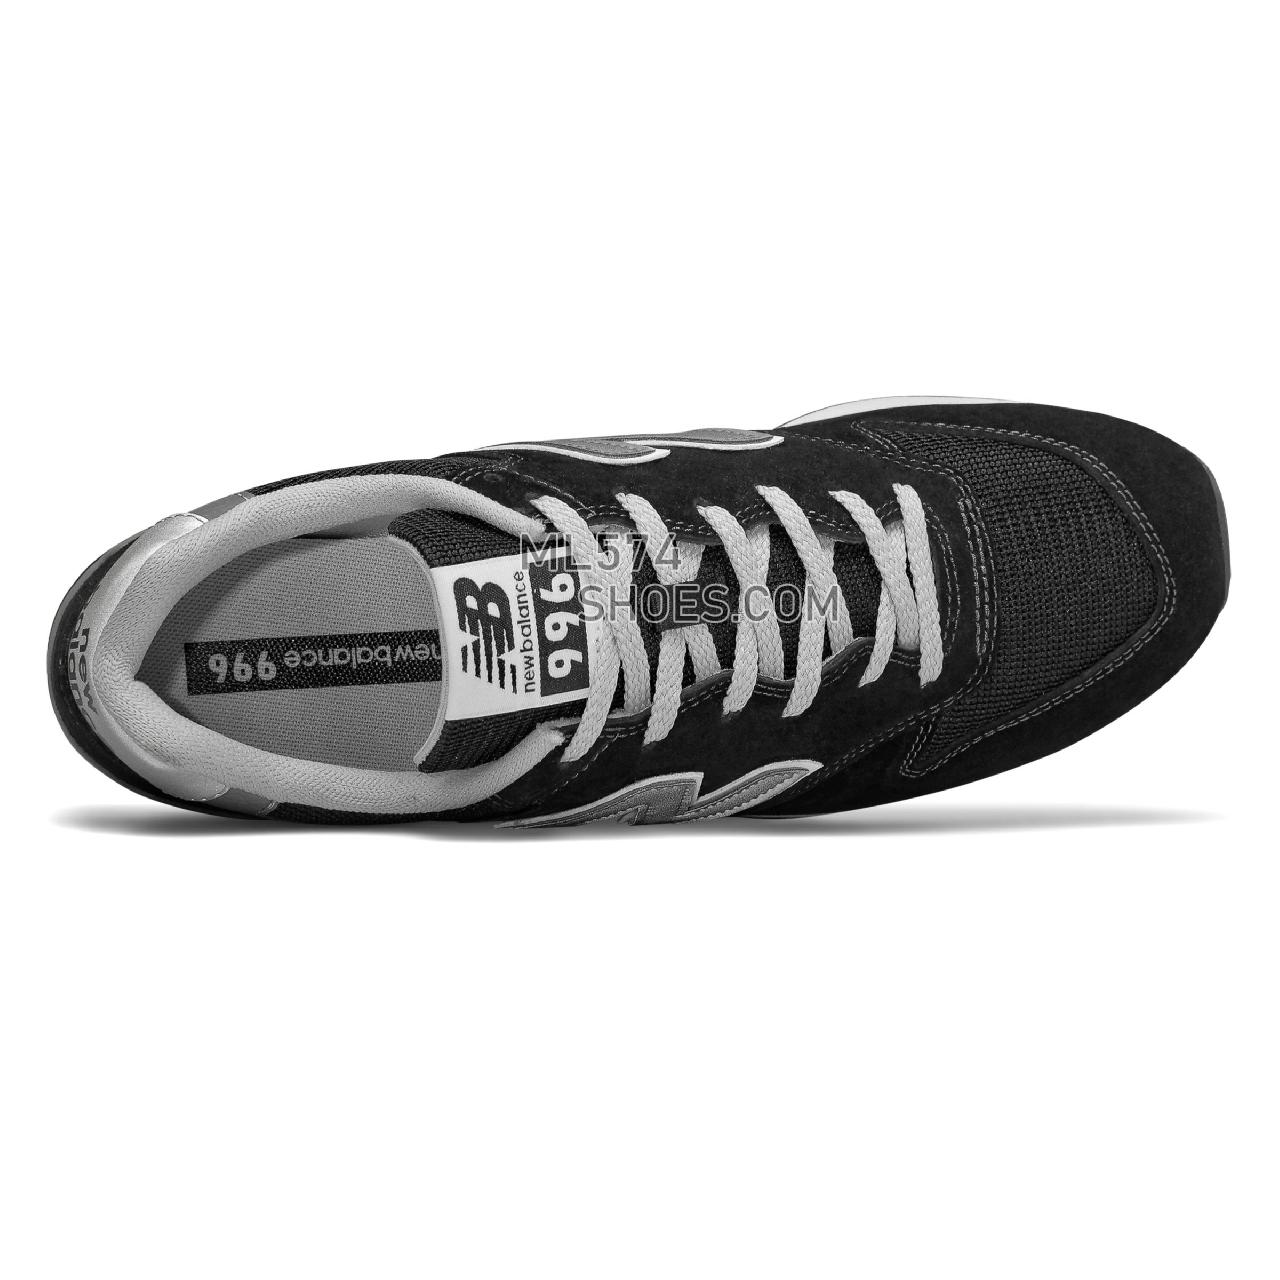 New Balance 996v2 - Men's Classic Sneakers - Black with Silver - CM996BP